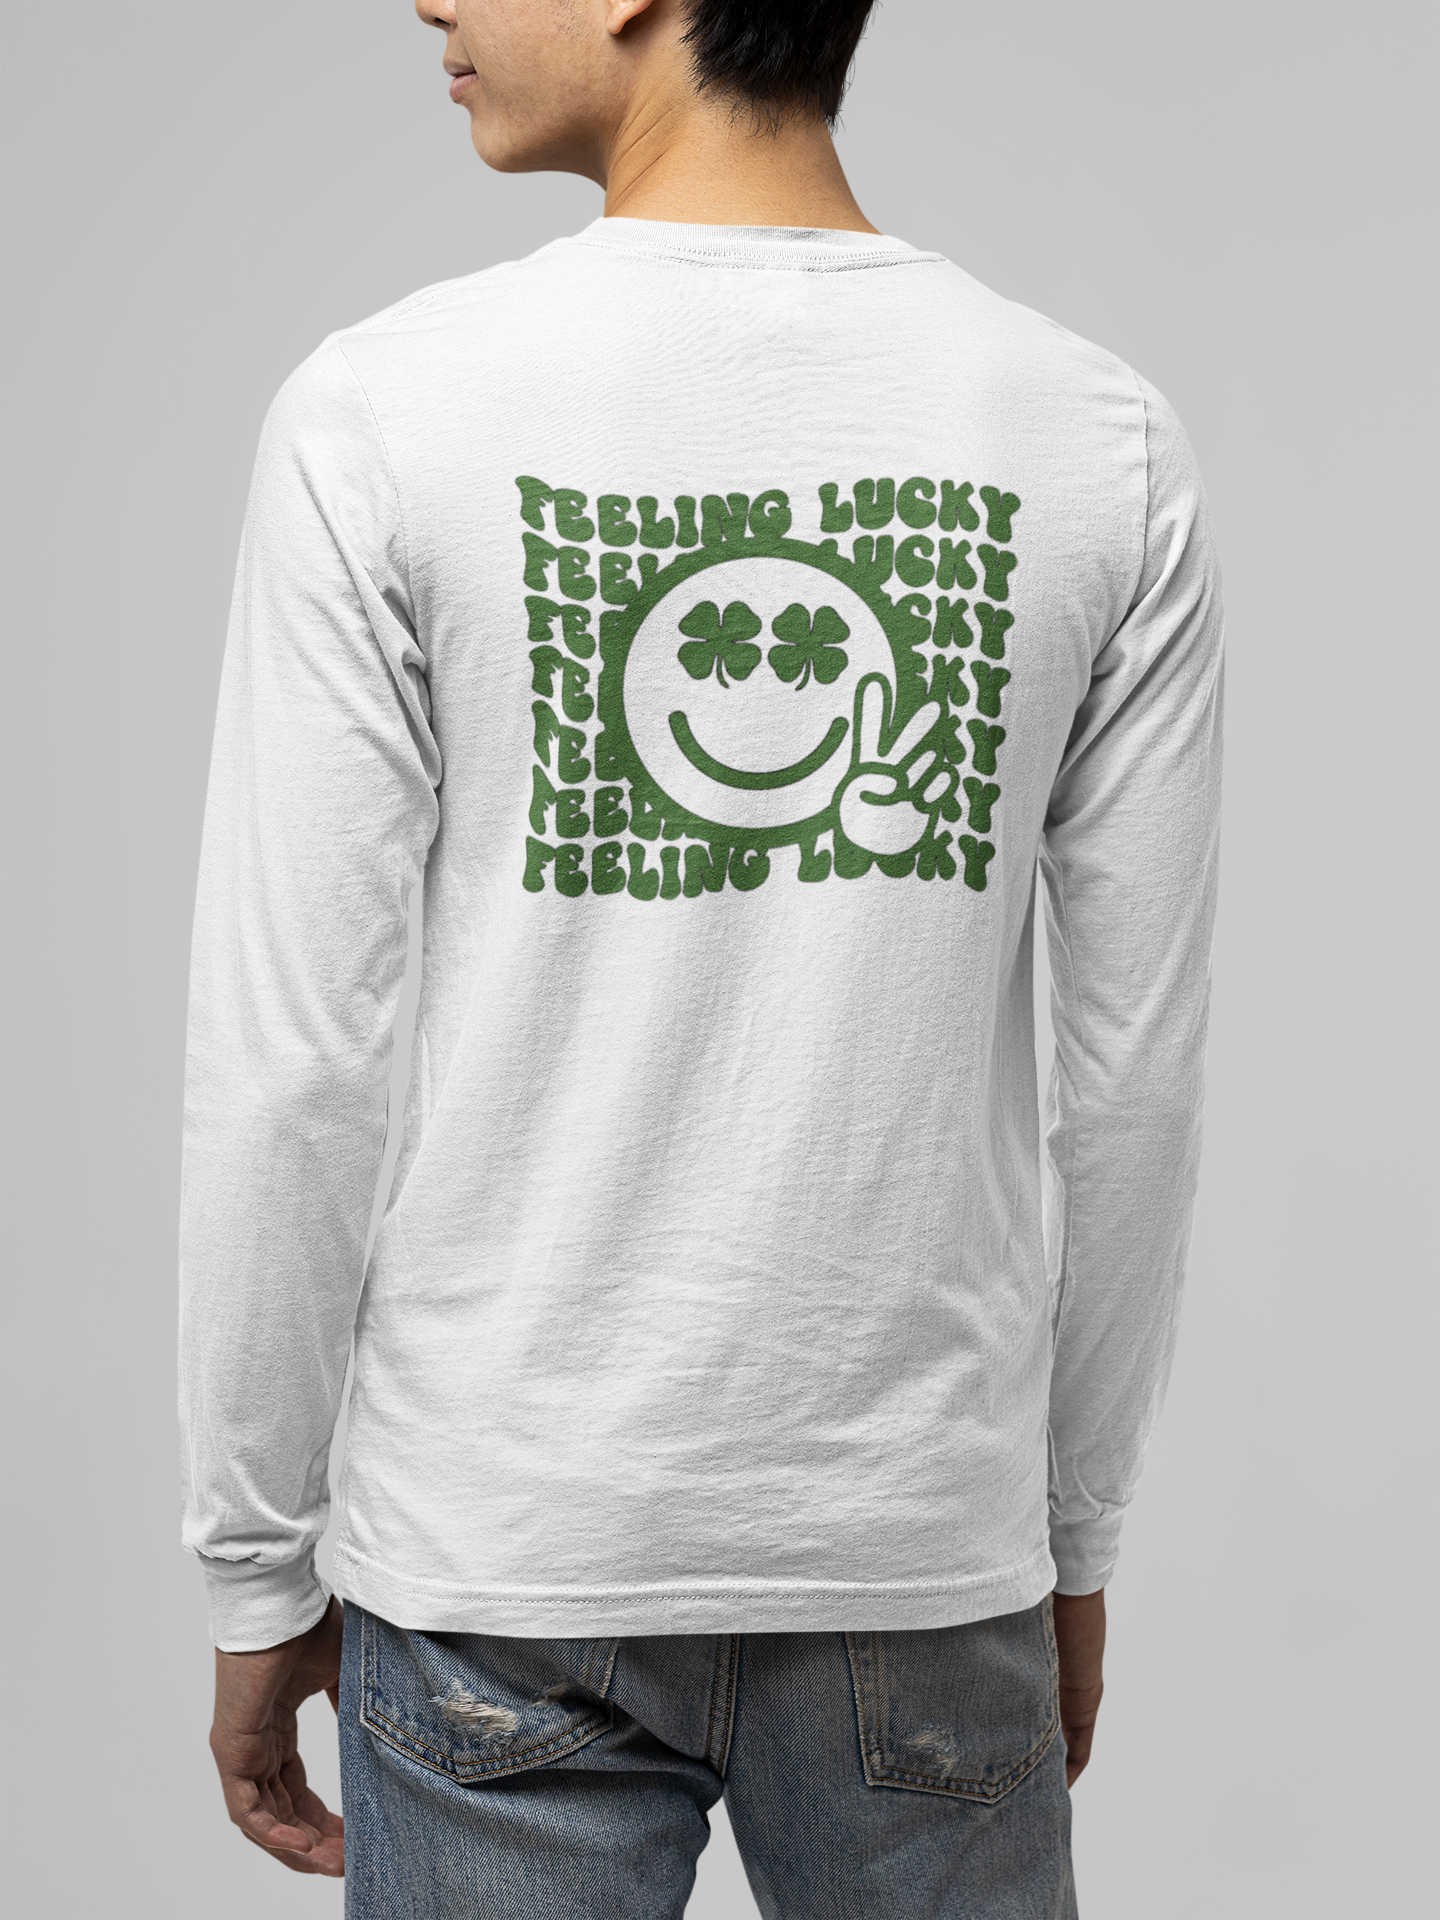 Feeling Lucky Long Sleeve Shirt in white. The back has a repetitive curvy saying "feeling lucky" with a smiley face making a peace sign with the eyes as clovers in green. The front has a four leaf clover pocket sale on the front in green. This is the back view of the shirt on a male model.